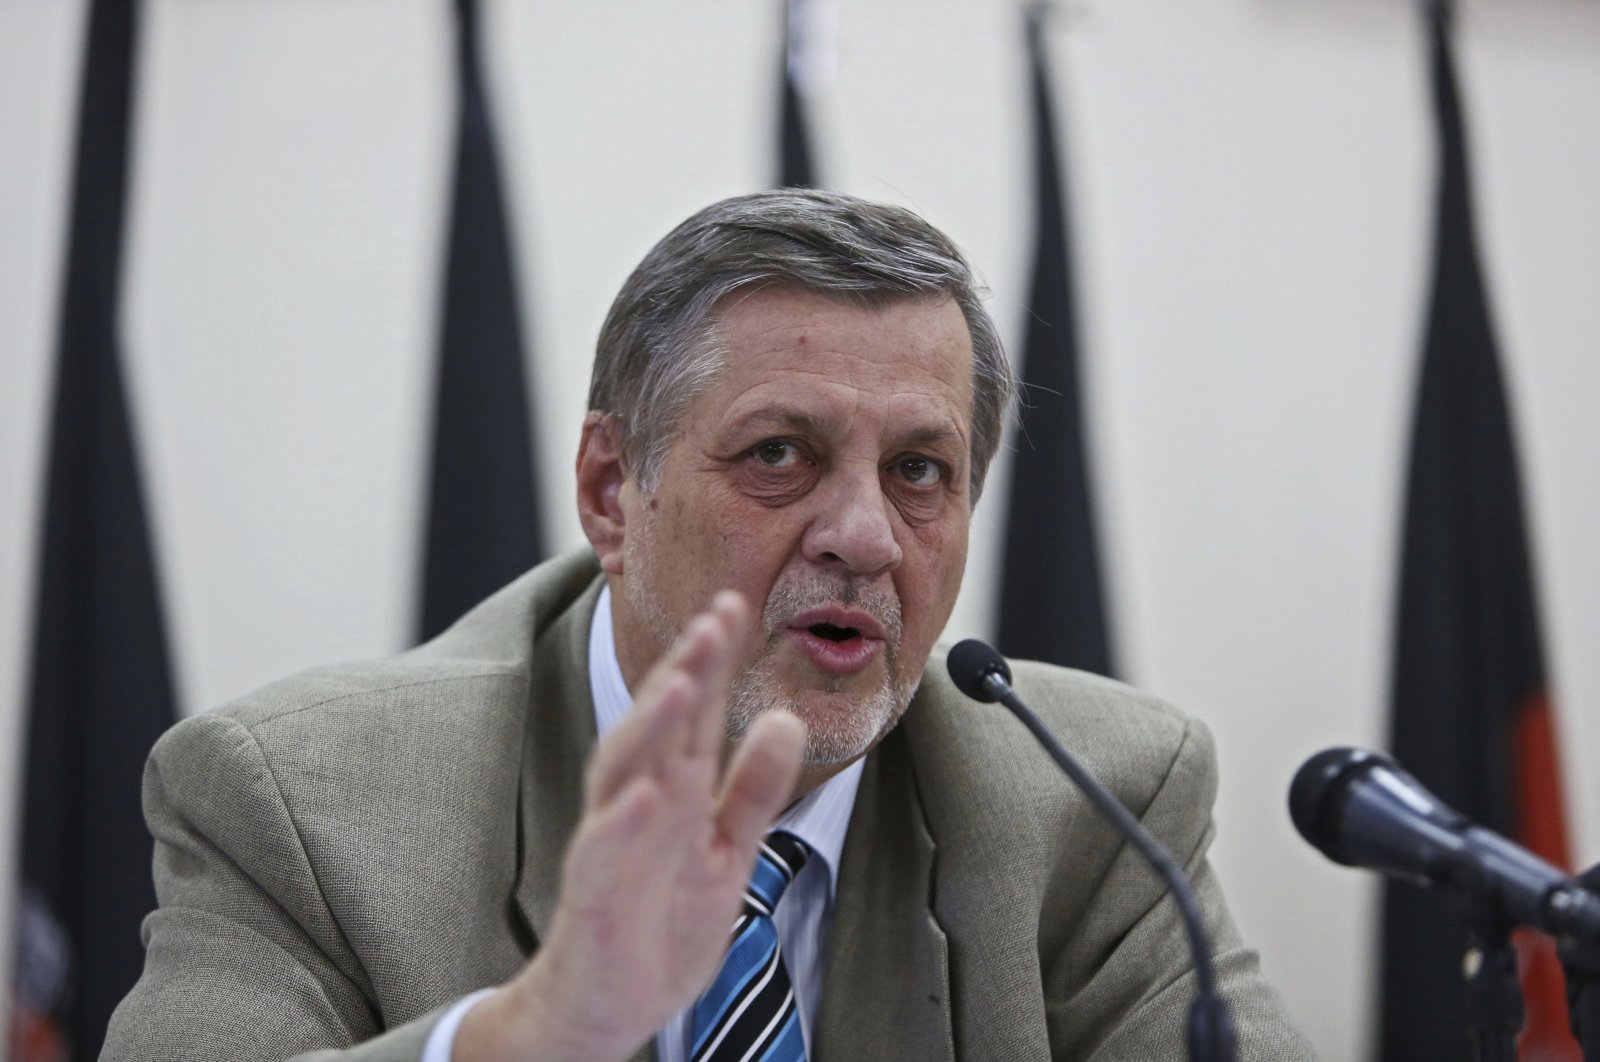 Jan Kubis, then-United Nation representative for Afghanistan speaks during a joint press conference at the Independent Election Commission office in Kabul, Afghanistan, July 13, 2014. (AP File Photo)